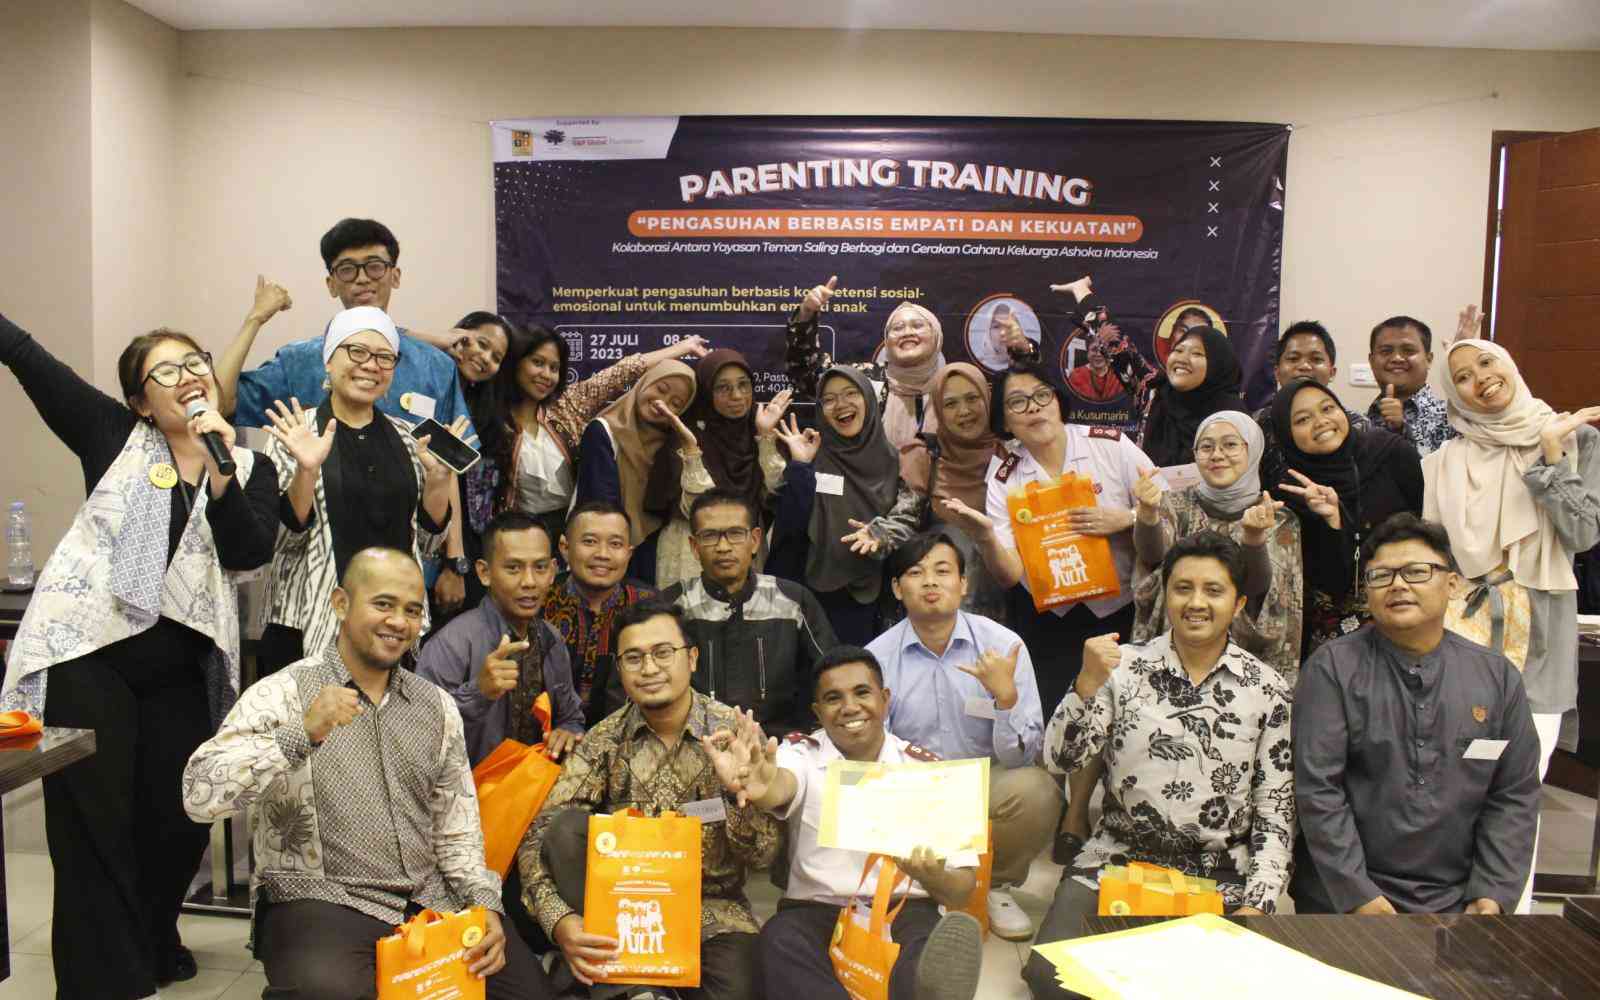 A group of people pose in front of a sign that says "Parenting Training"